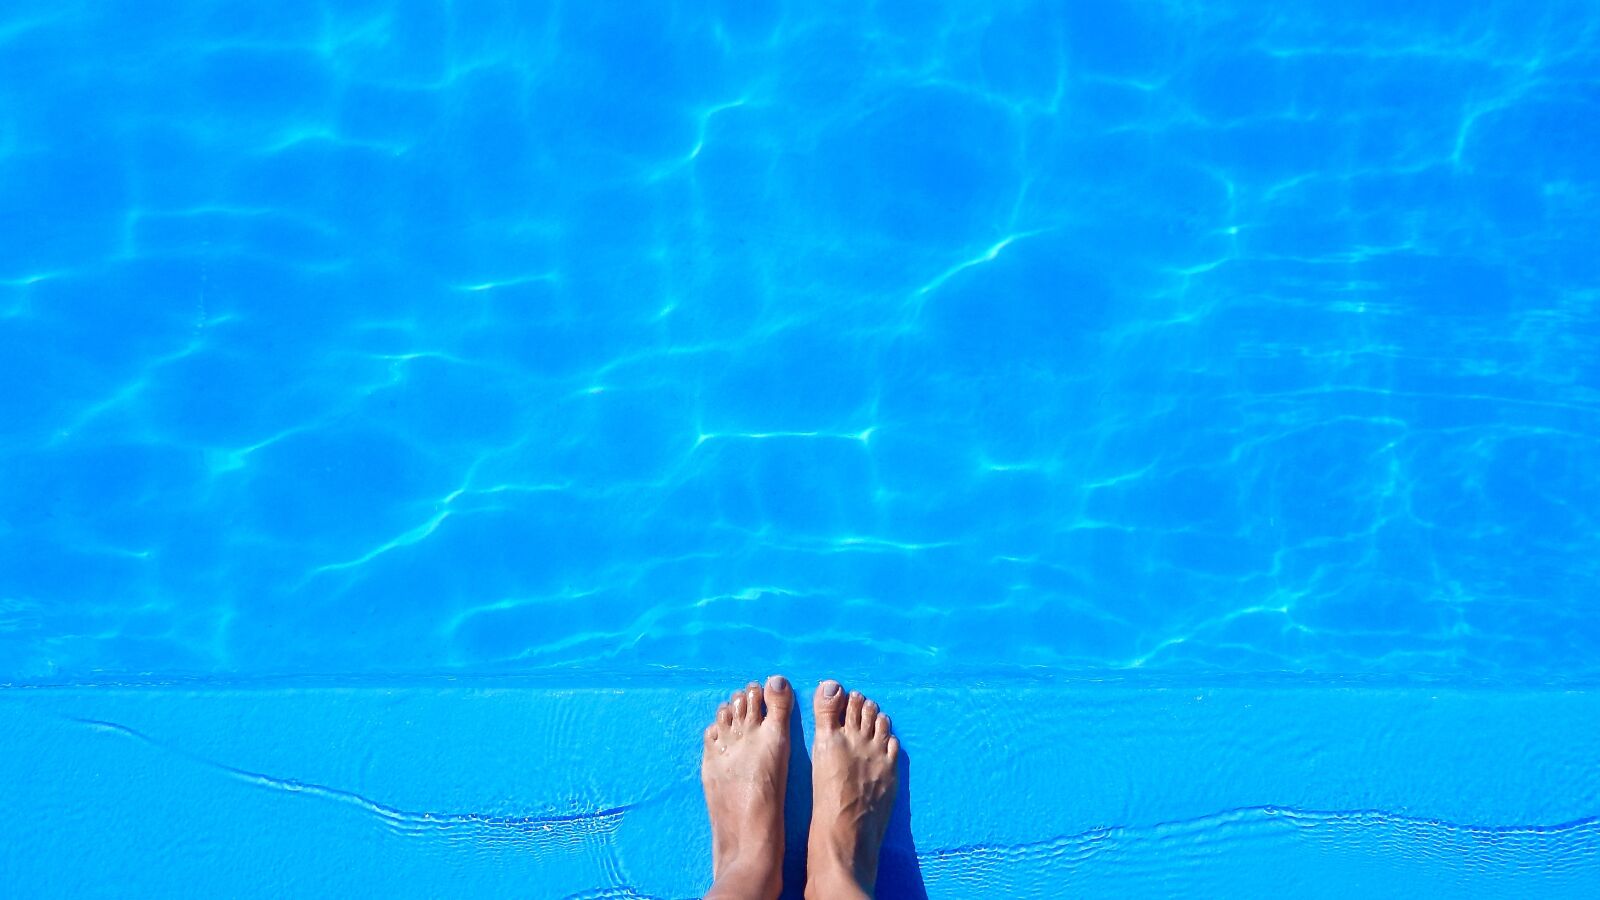 Nikon Coolpix L830 sample photo. Pool, feet, closed for photography